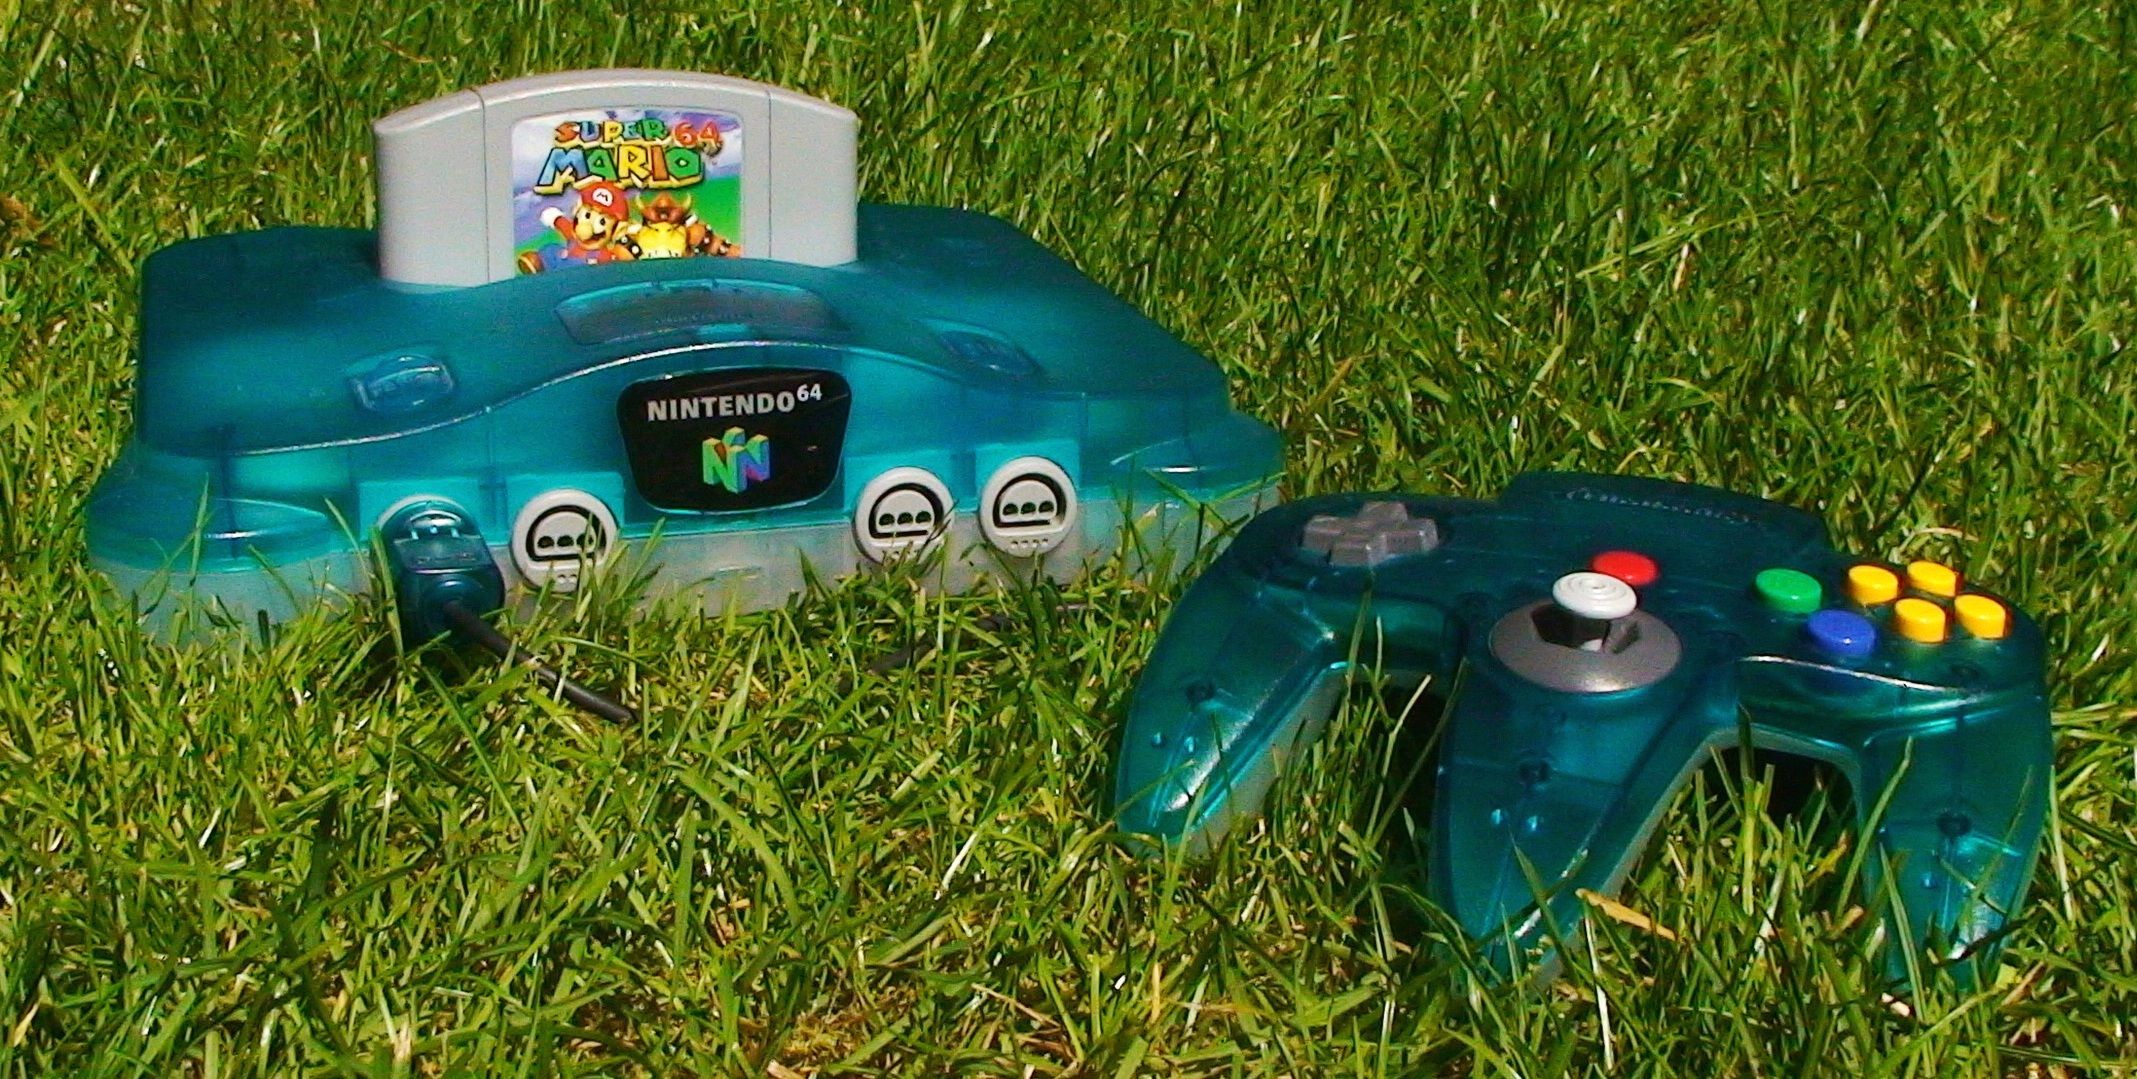 A blue translucent N64 console in the grass.